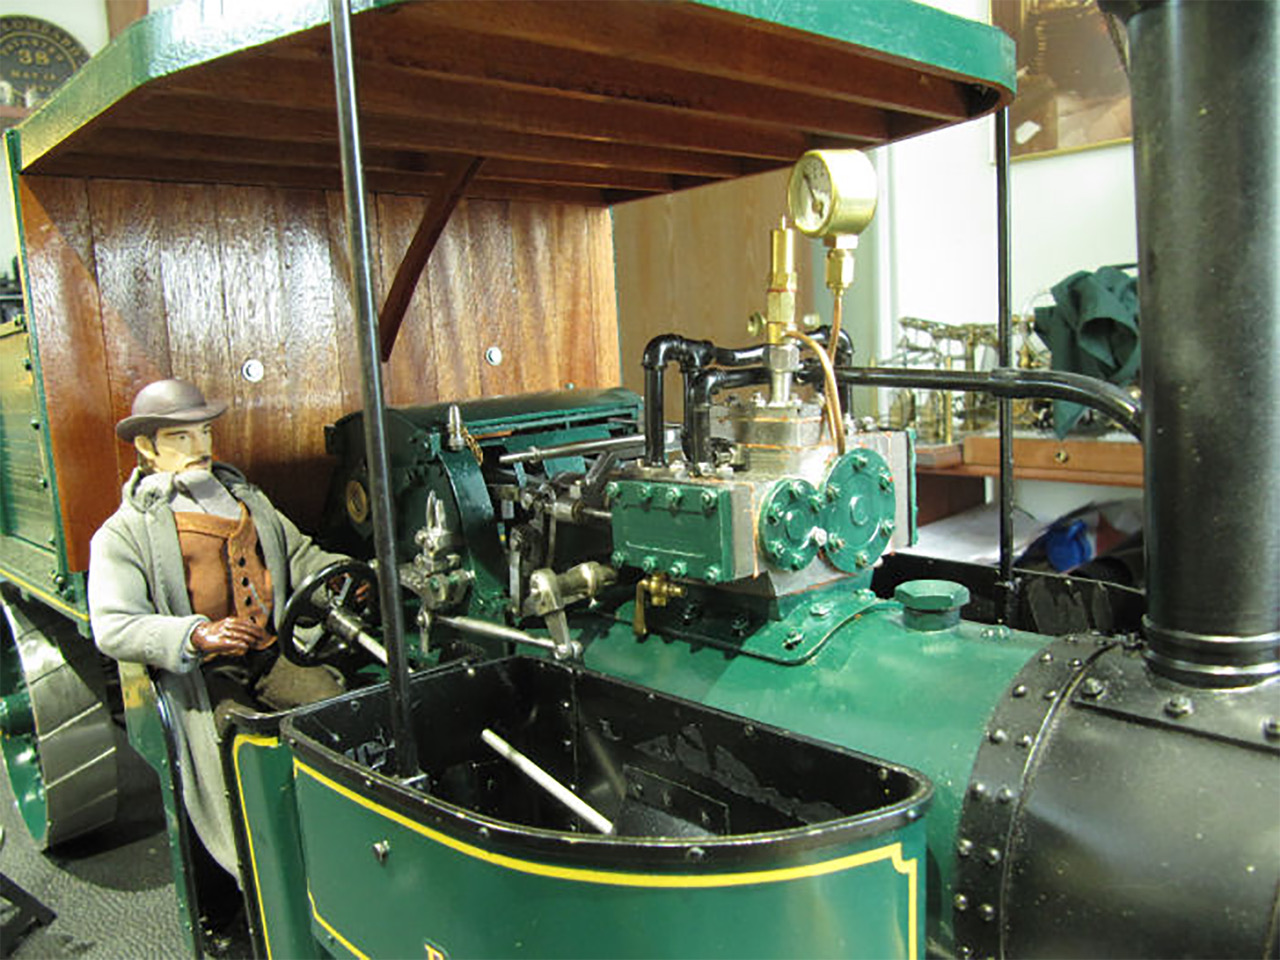 A close-up of the steam wagon cab.